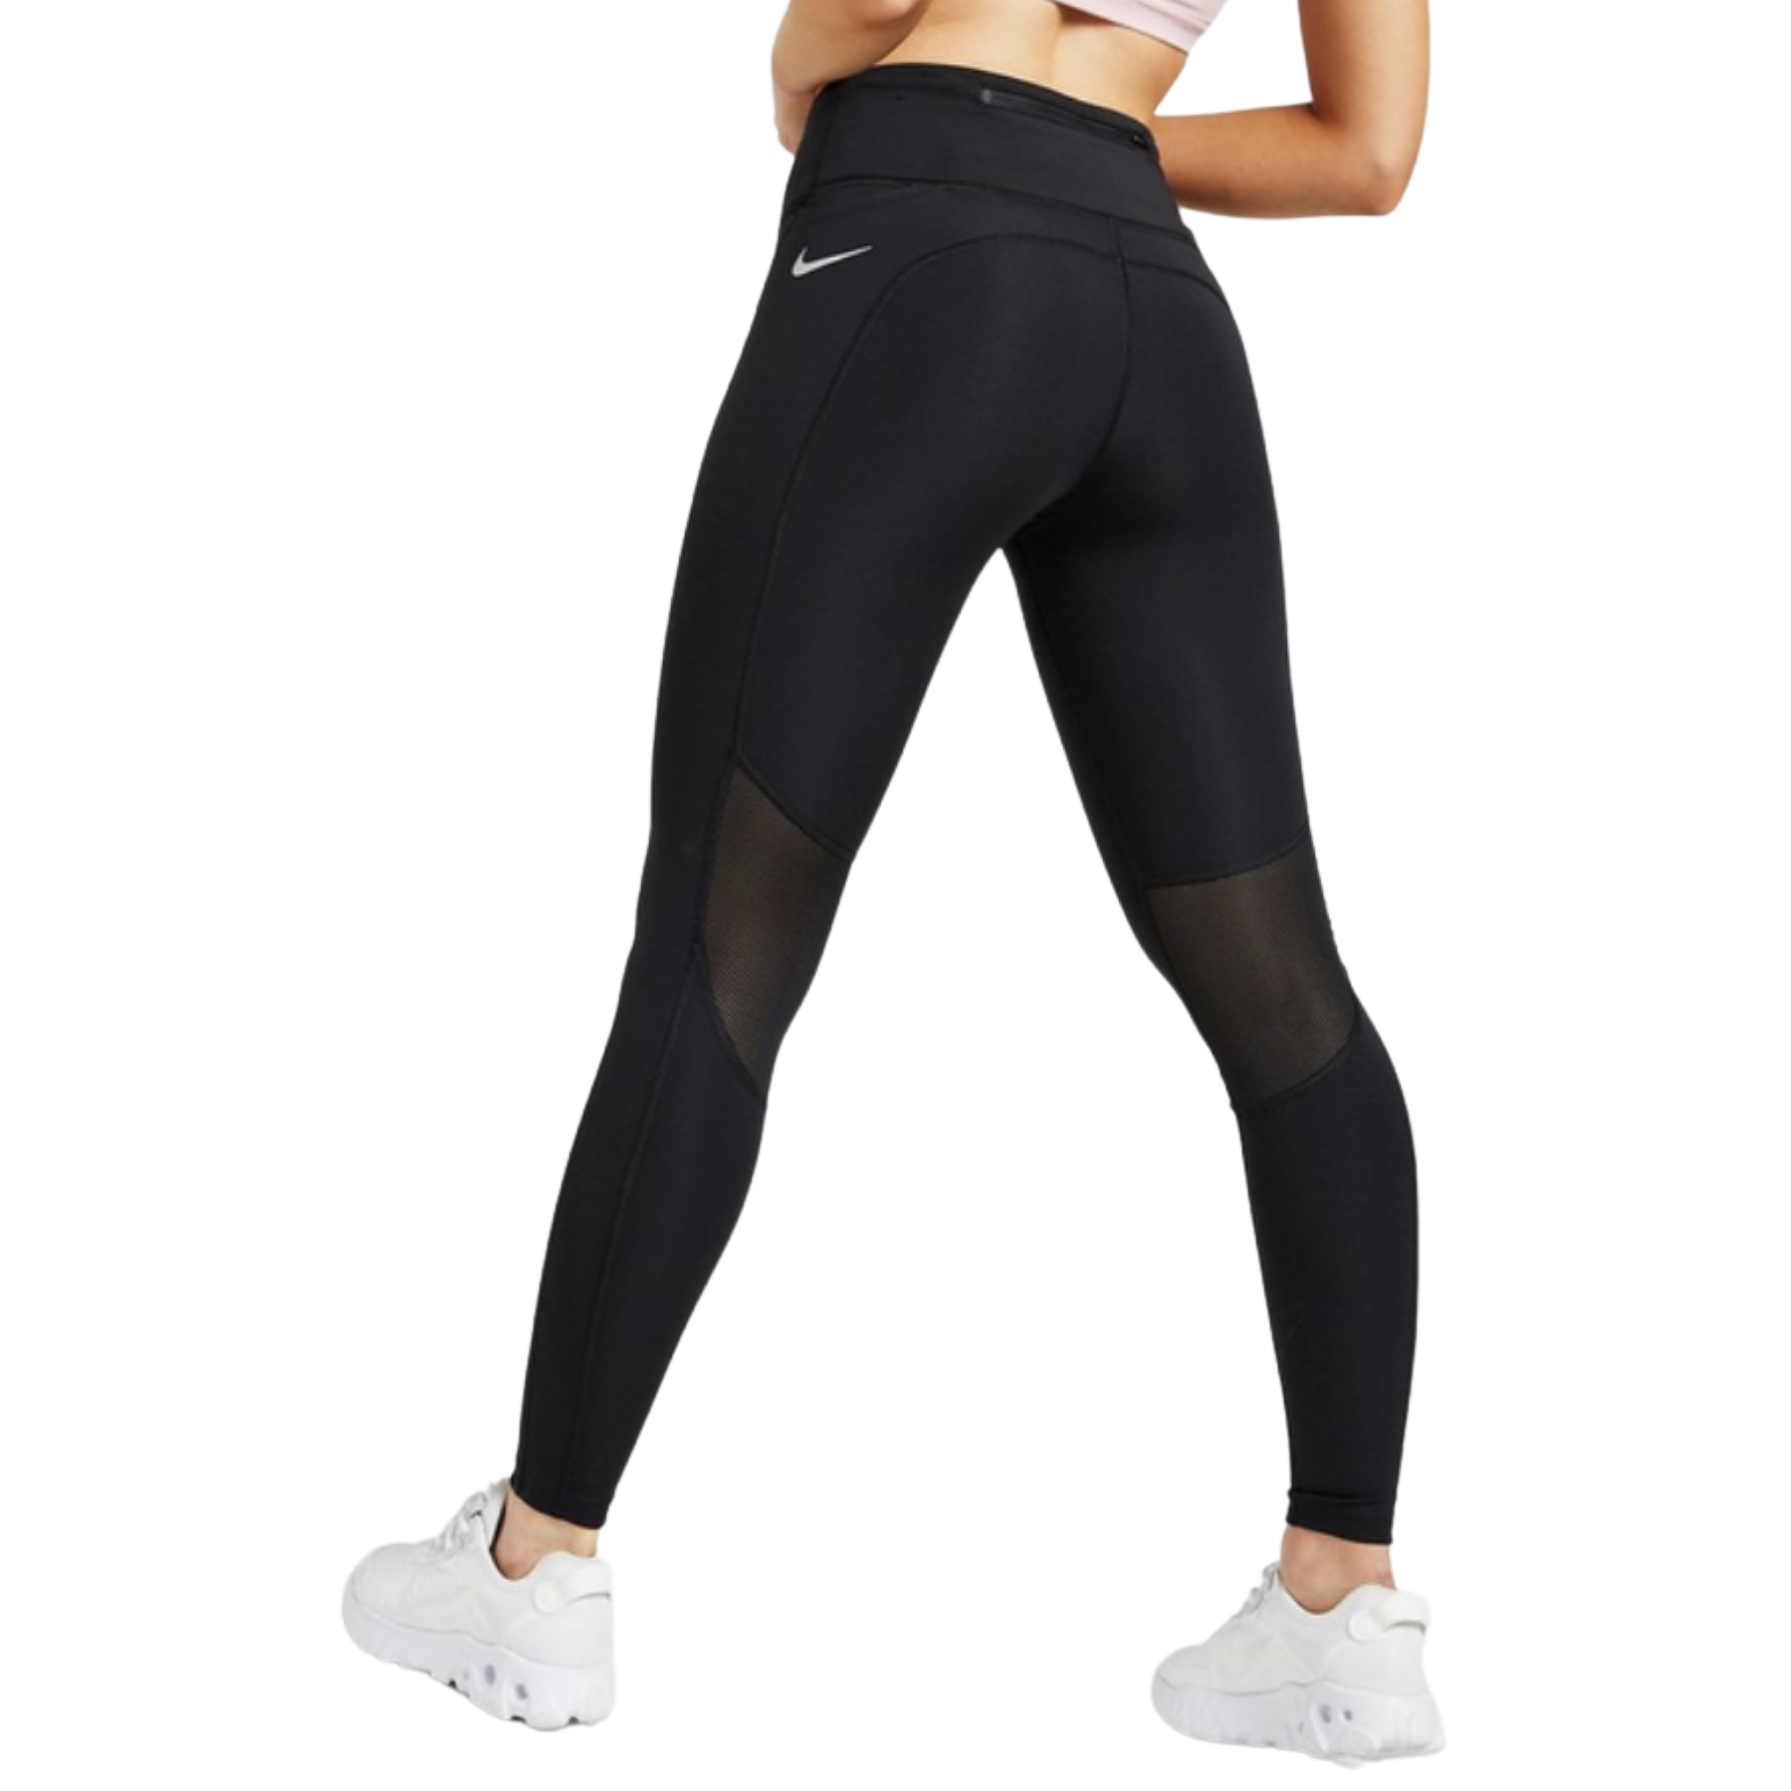 Nike epic faster tights/ leggings - small brand new, Women's